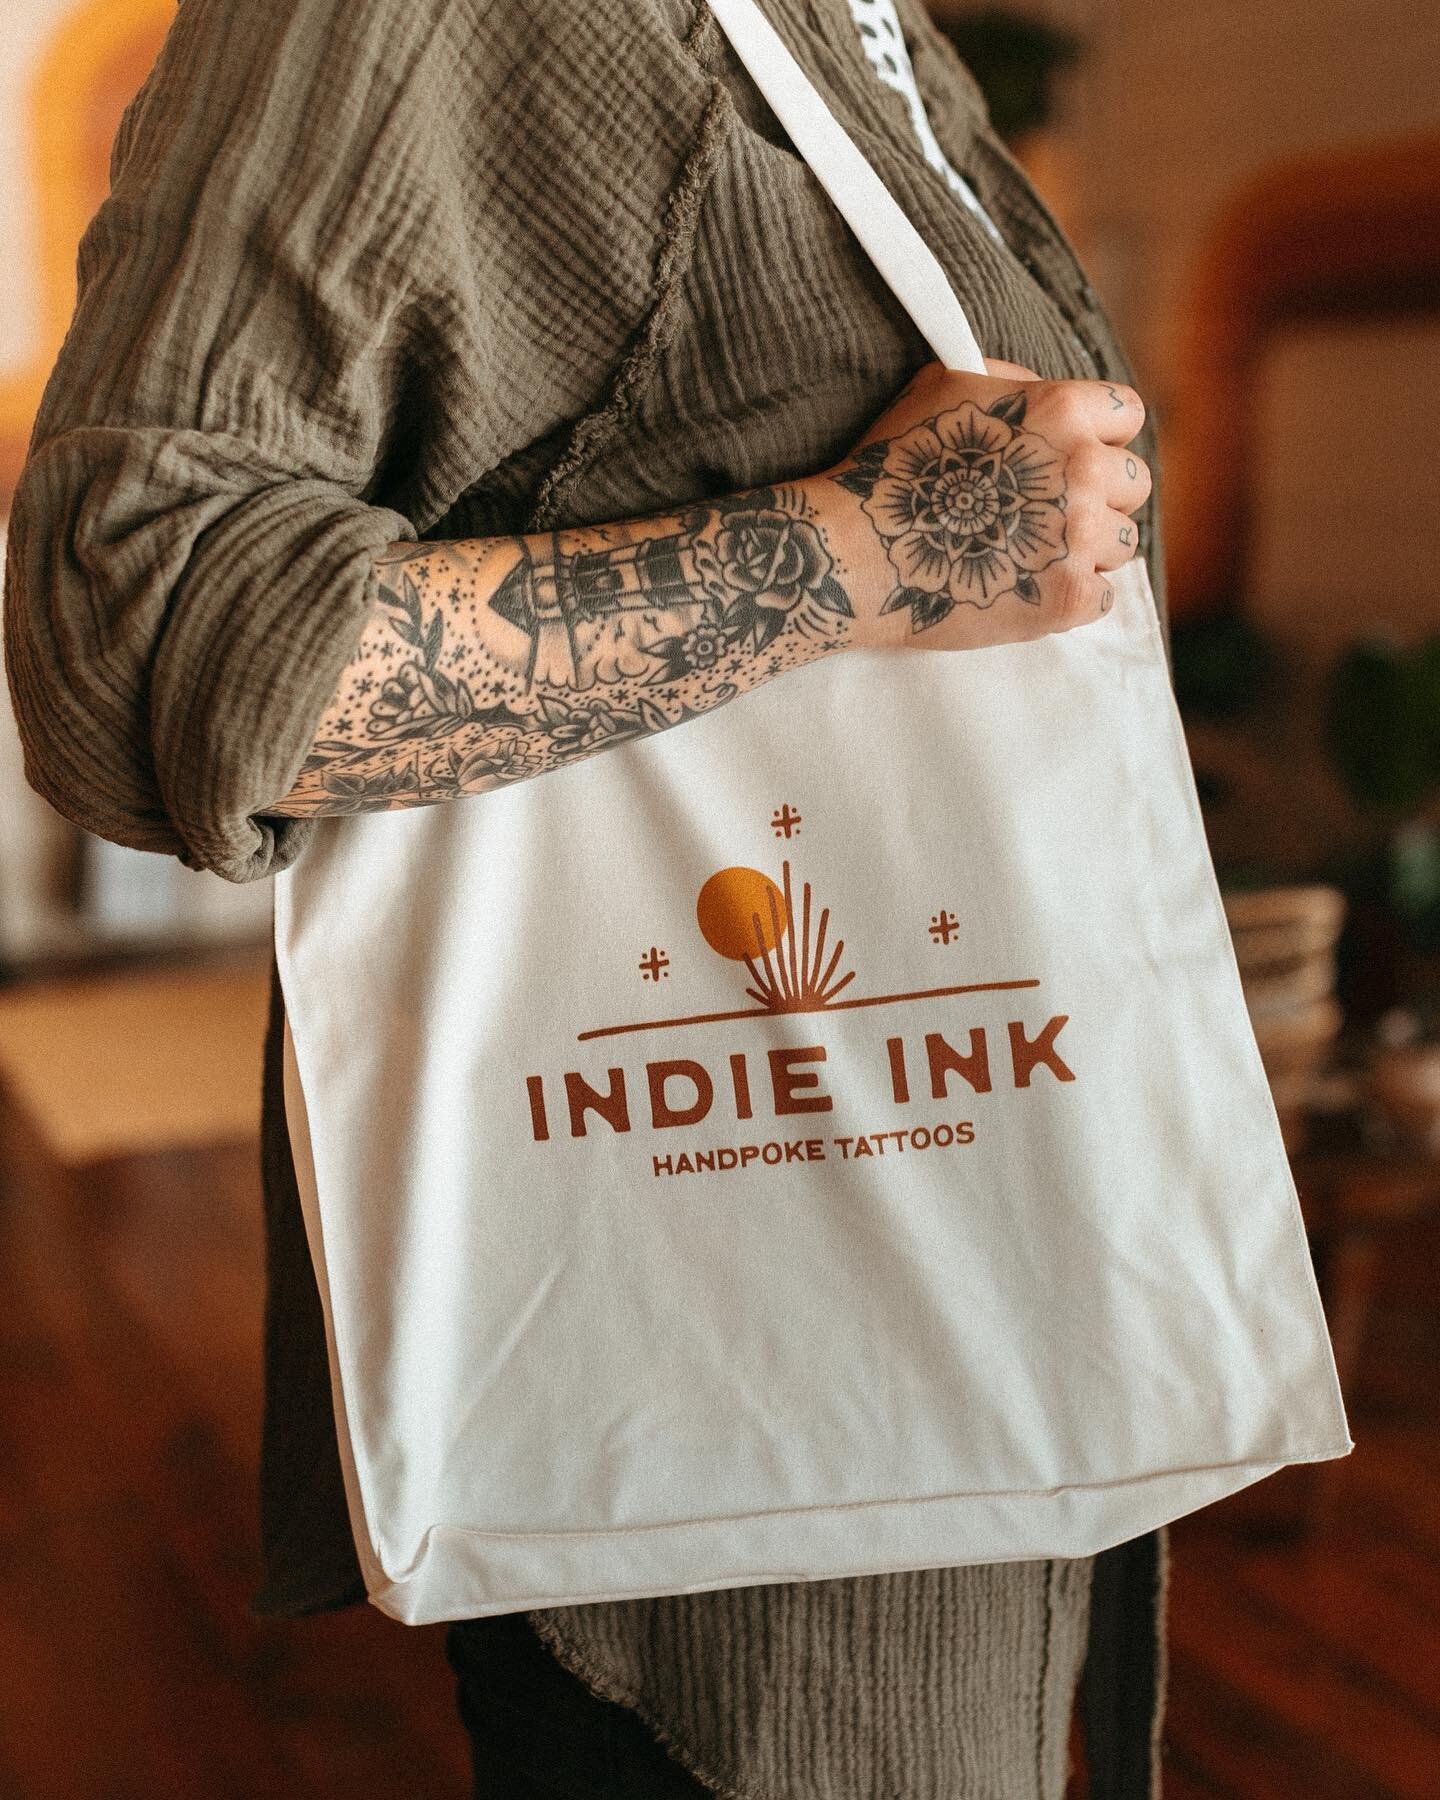 ⊹ INDIE INK TOTES ⊹ Available now at the shop! Limited quantities - grab one while you can.